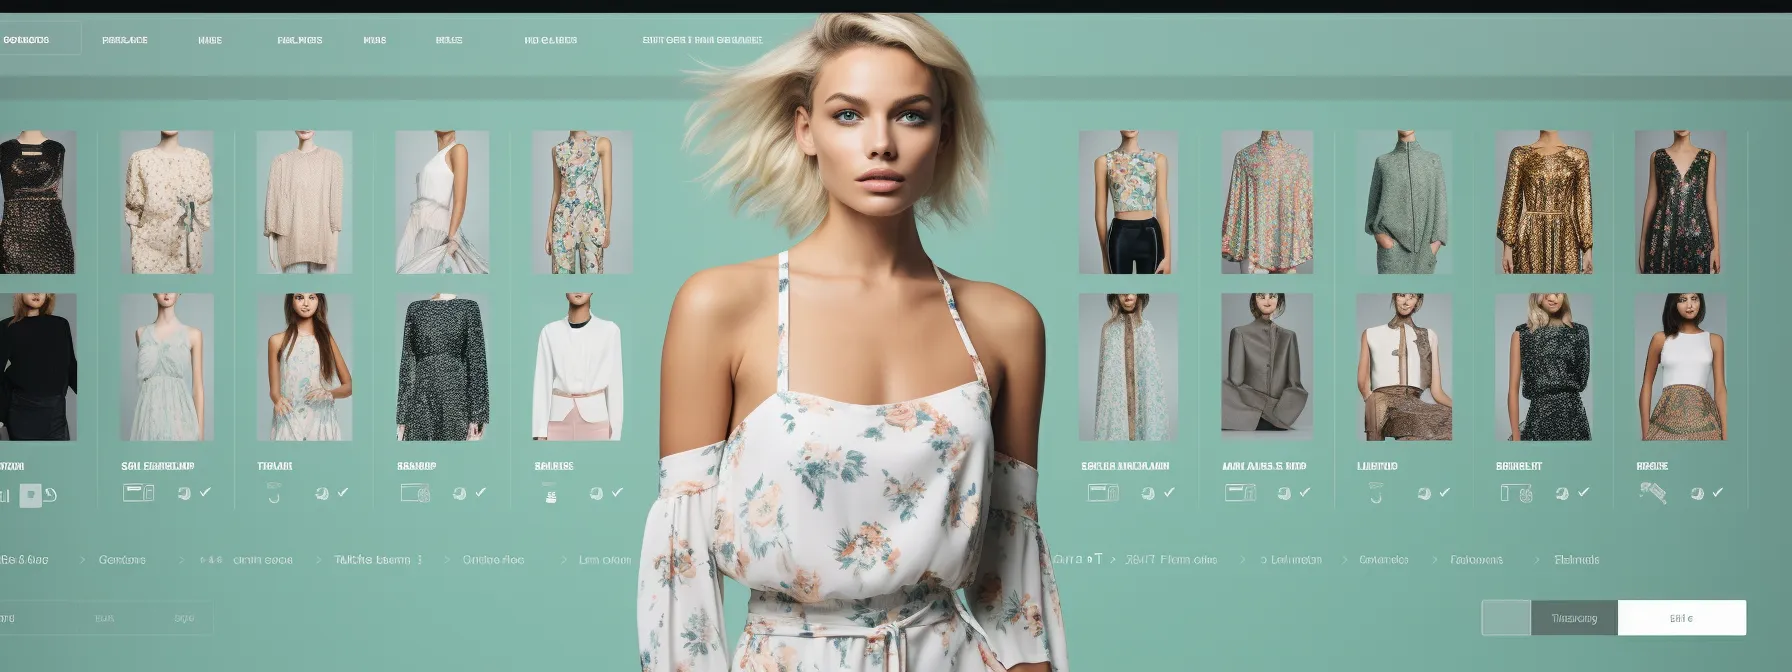 a fashion website with multiple backlinks from other websites for increased visibility on search engines.